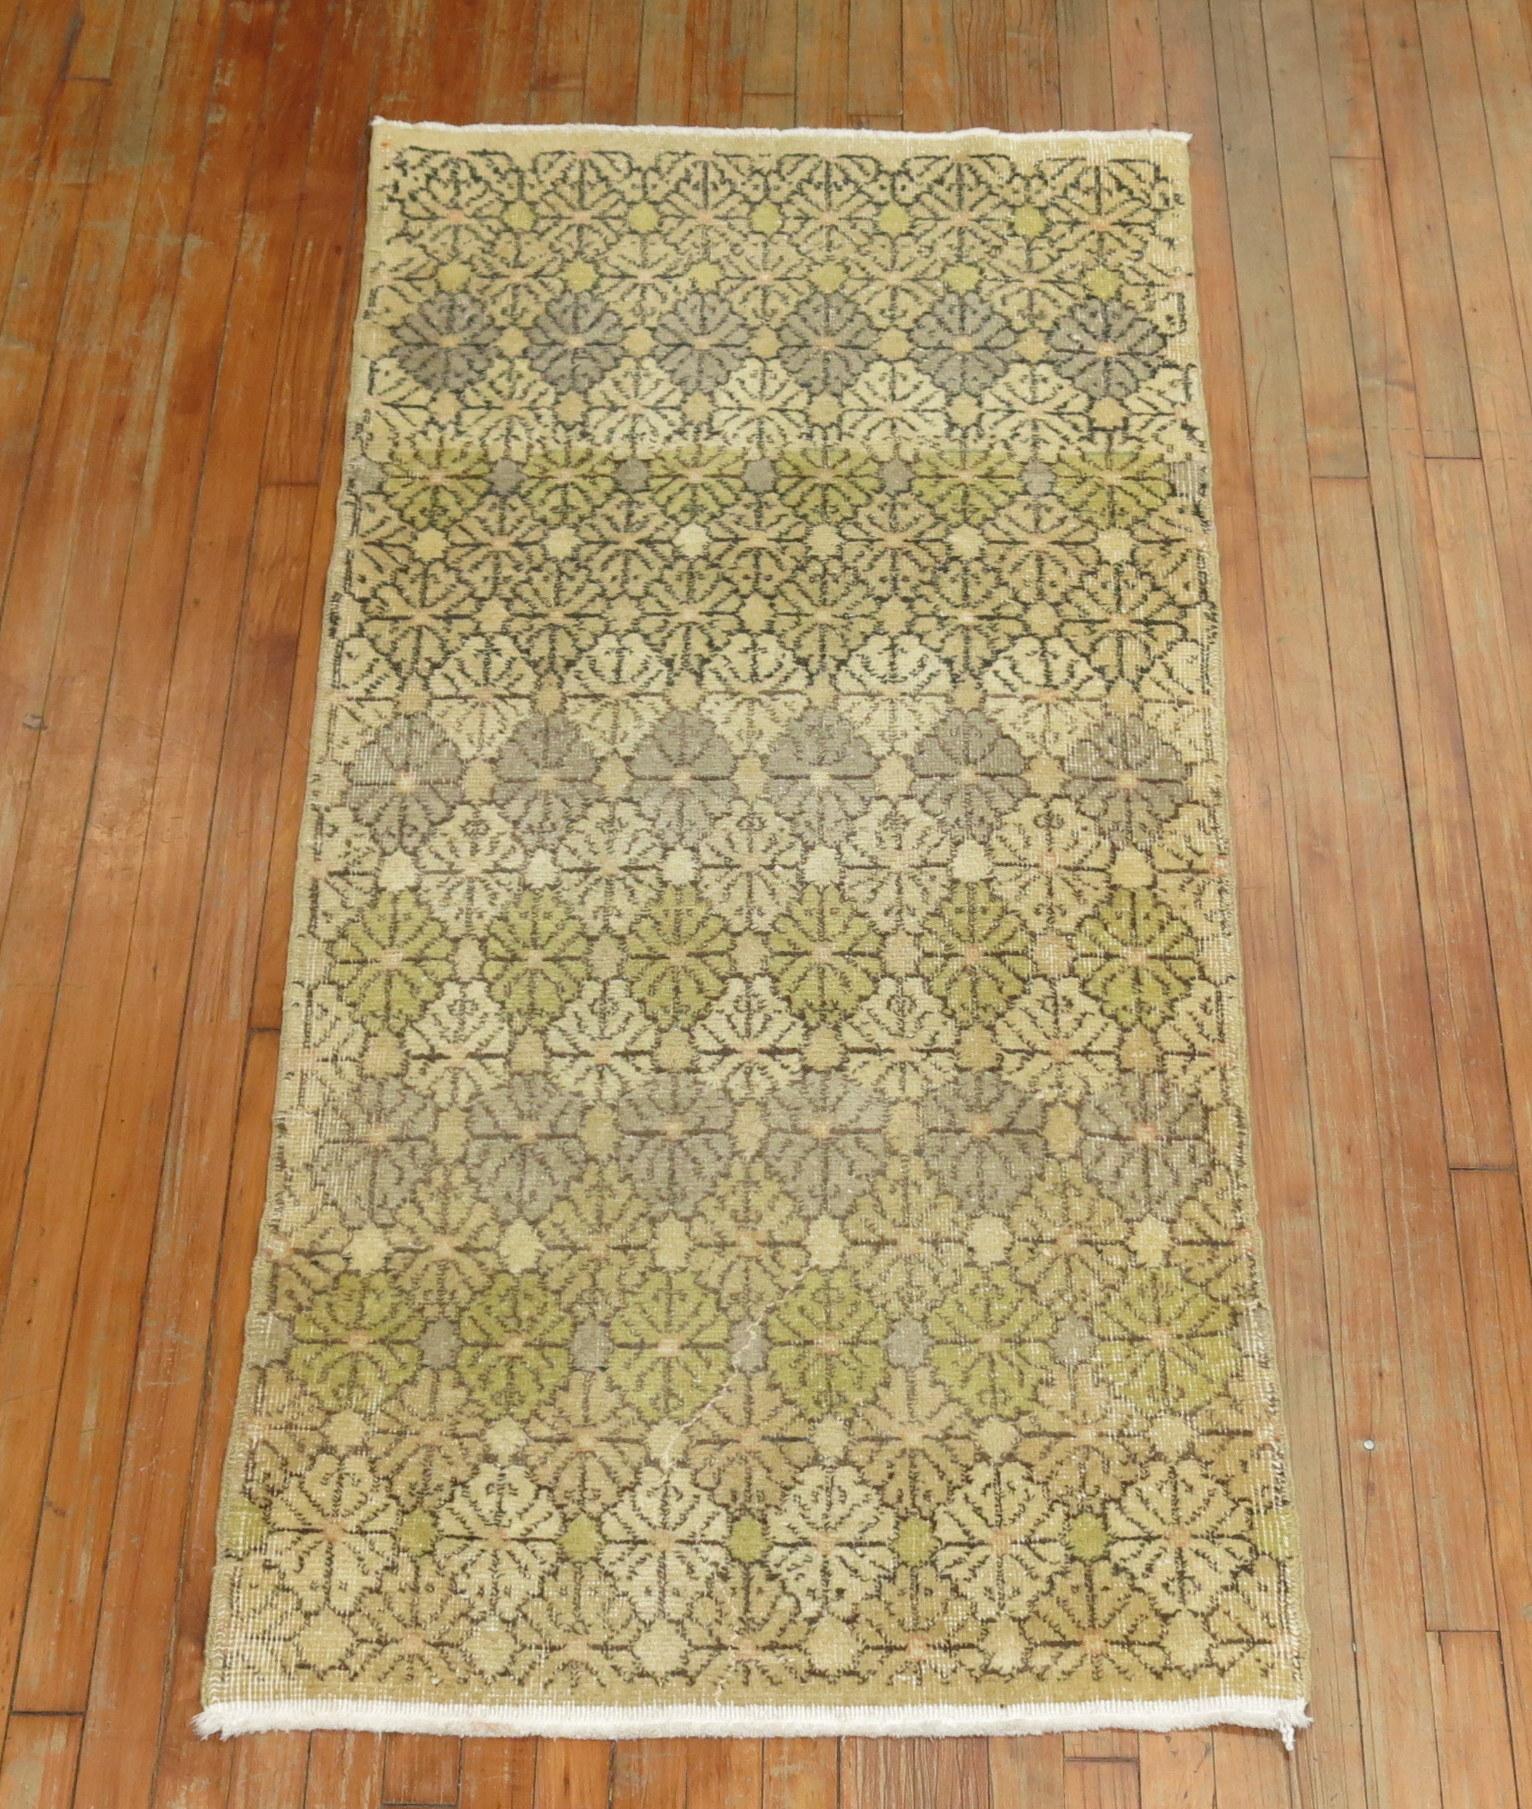 Neutral colored Turkish deco wide runner from the mid-20th century with an all-over repetitive design. Beige, tans, brown, light green accents, circa mid-20th century.

Measures: 2'10” x 6'.